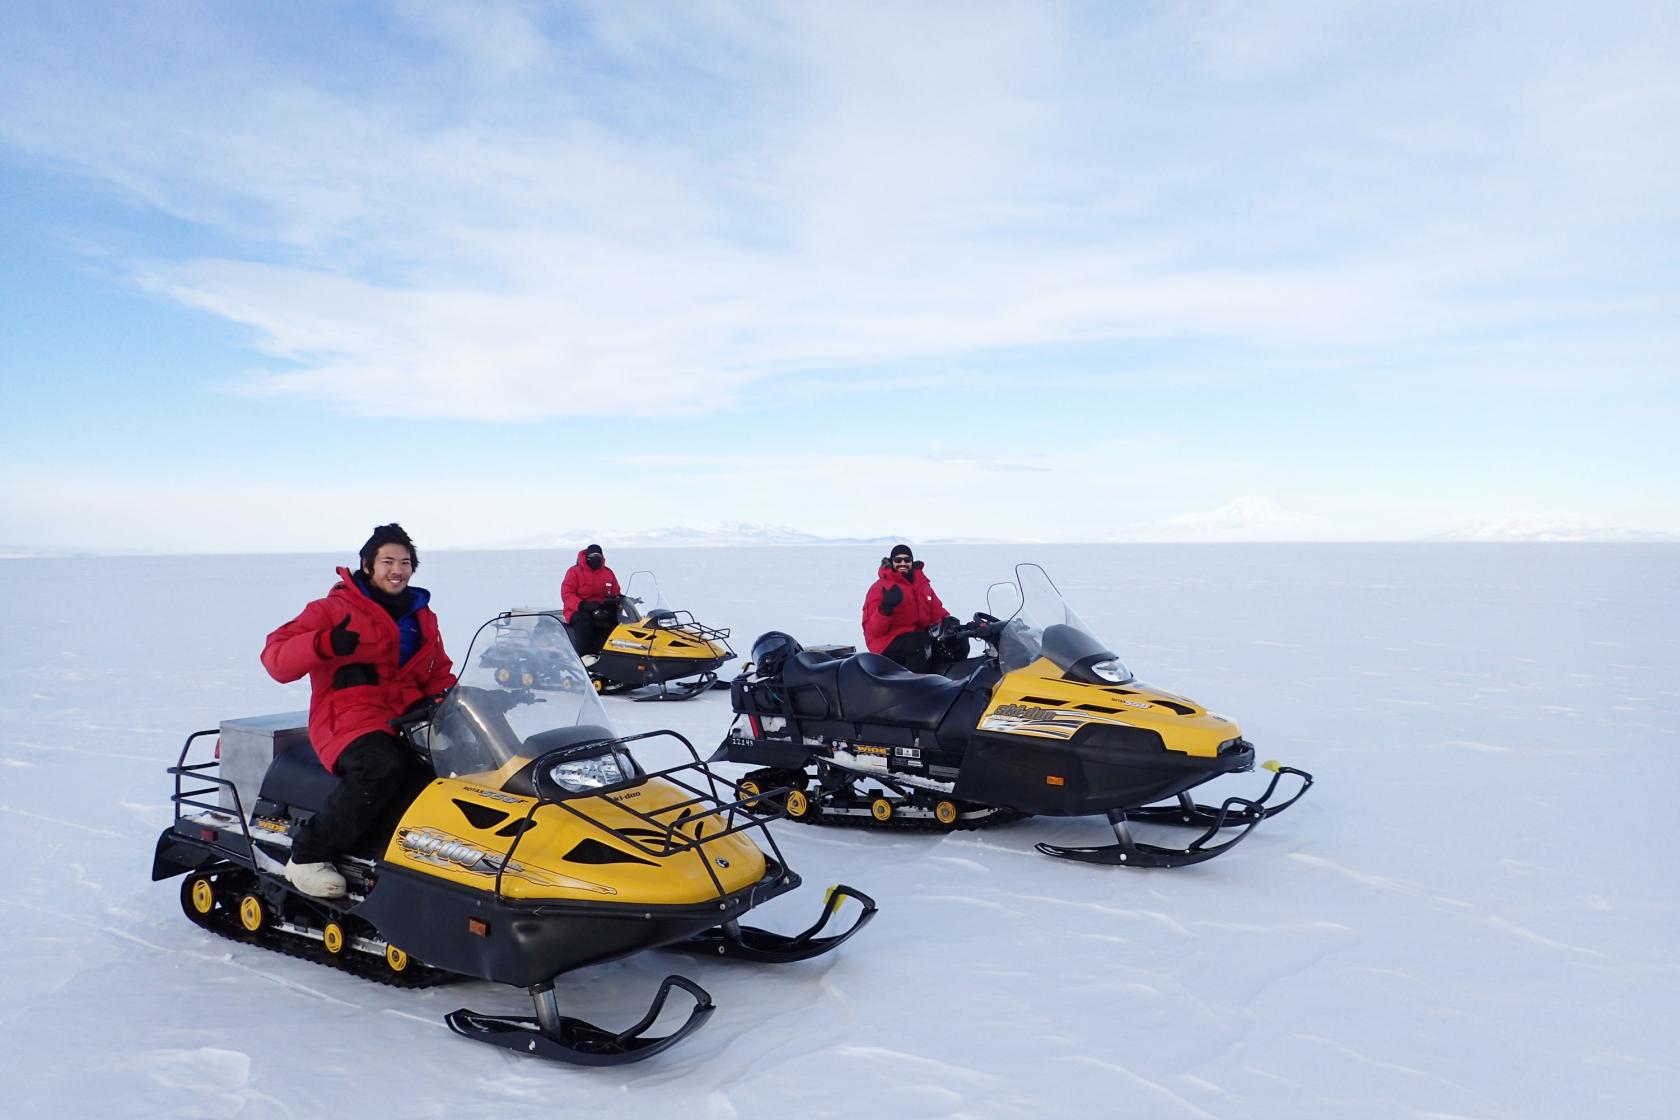 Three students of the Hofmann lab riding snowmobiles in Antarctica